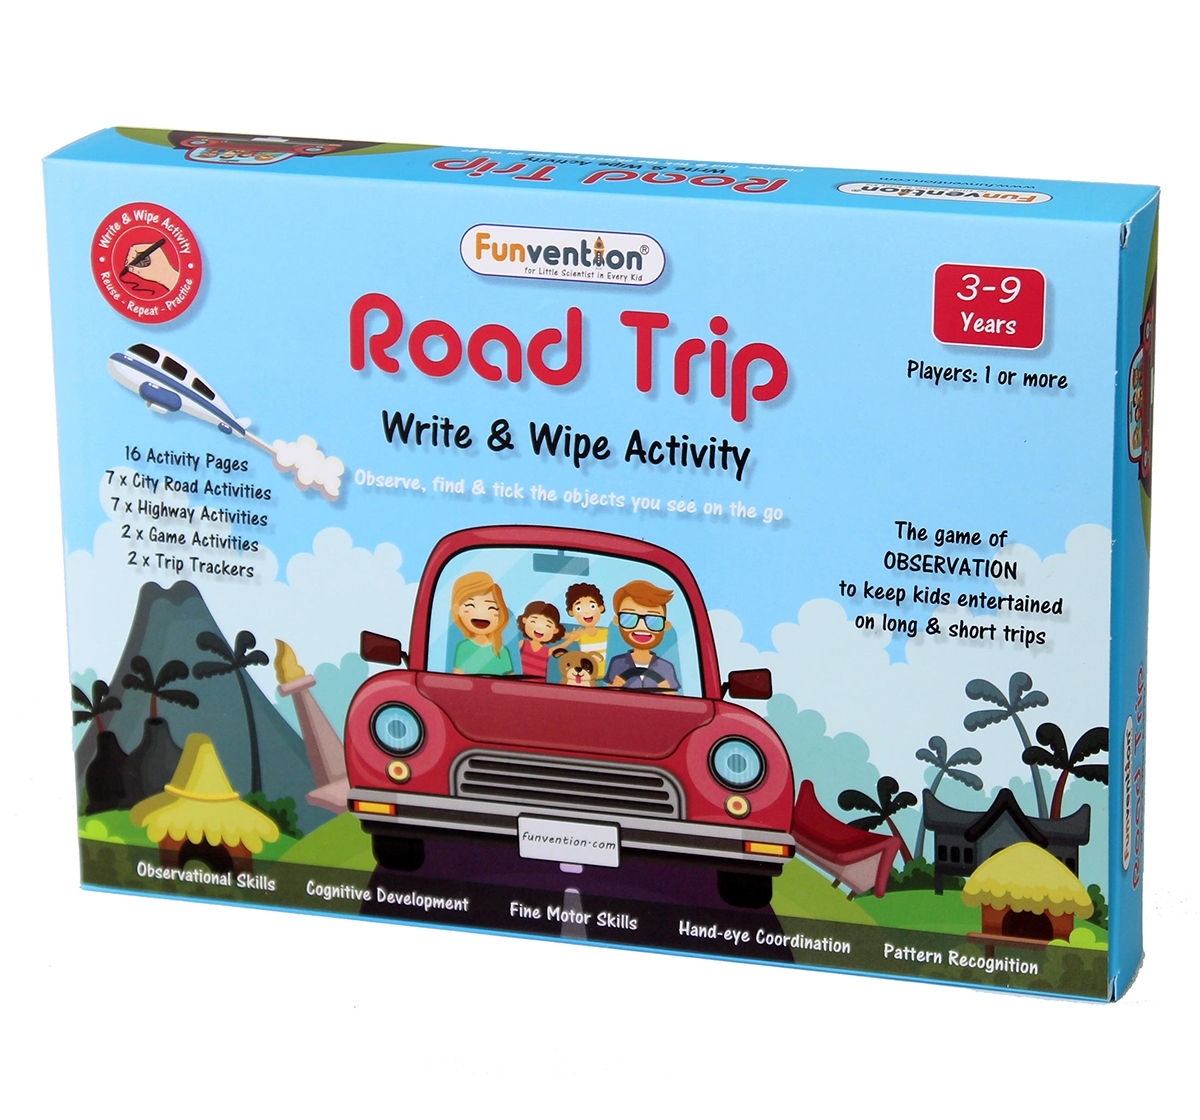 Funvention | Funvention Write & Wipe Activity - Road Trip Science Kits for Kids Age 3Y+